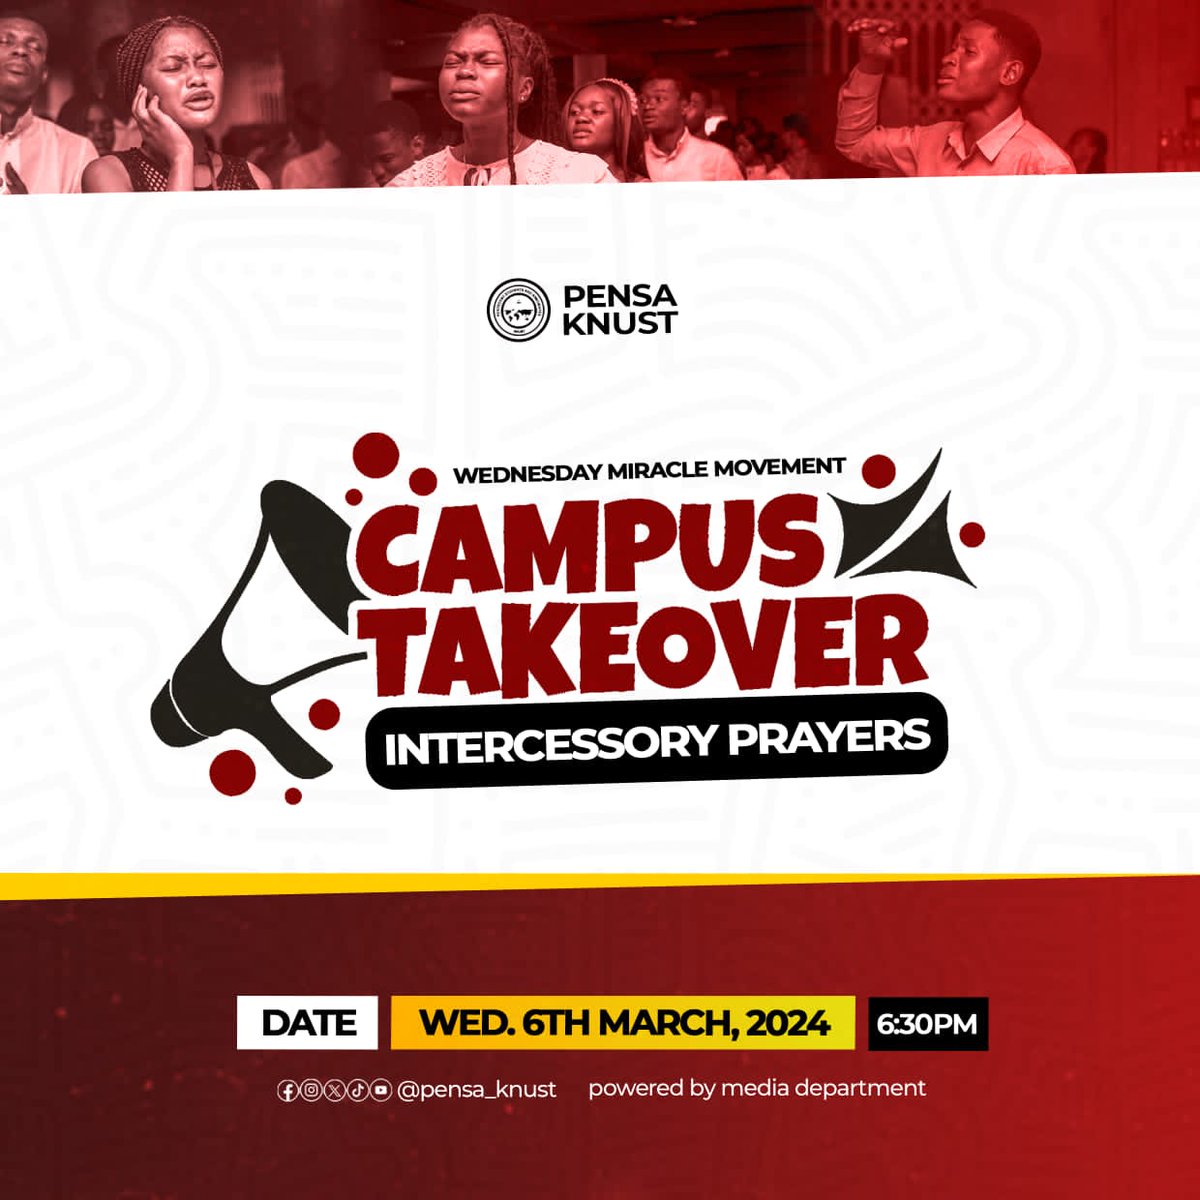 Christ in you!

I urge, then, first of all, that petitions, prayers, intercession, and thanksgiving be made for all people

Join us  📍TODAY at the ⛪Queens Hall Dining Hall as we intercede for souls won from the Campus Takeover.
⏰6:30pm

#MidweekService 
#MiracleMovement